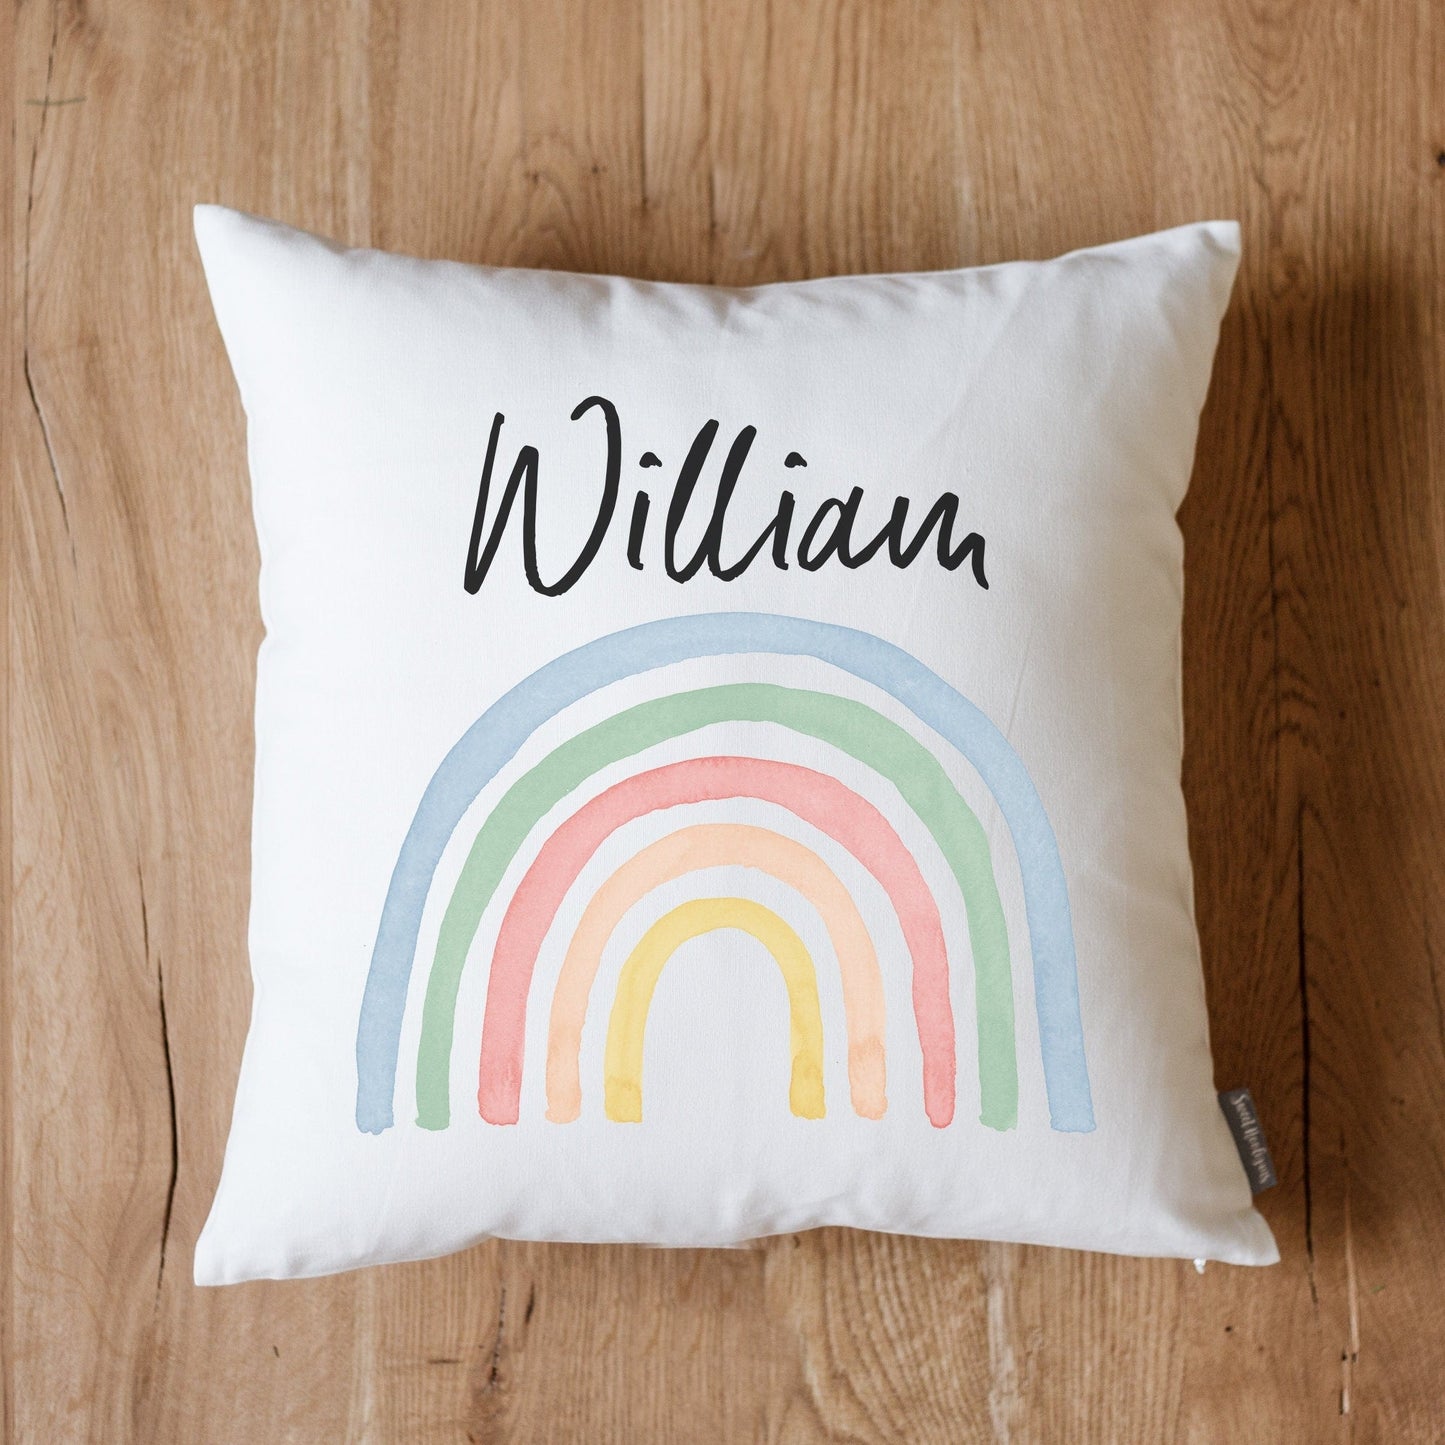 Name with Rainbow Pillow Personalized Name Pillow | Rainbow Deco | Nursery Decor Pillow with Custom Name and Rainbow | Home Decor